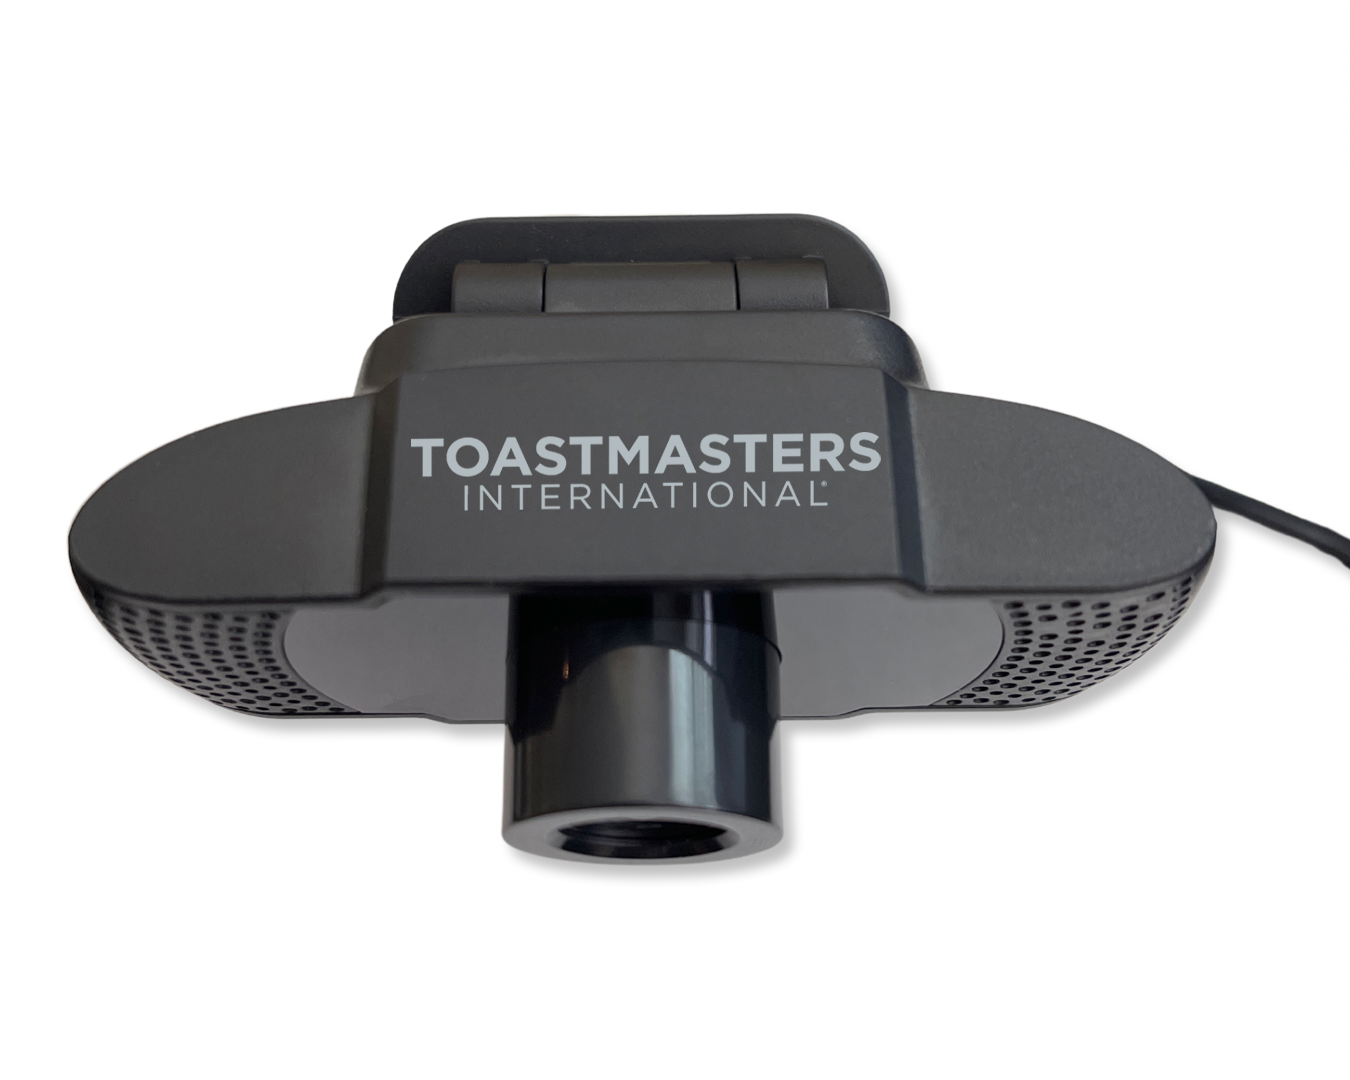 HD-USB-Webcam-and-Microphone-1080p-Toastmasters